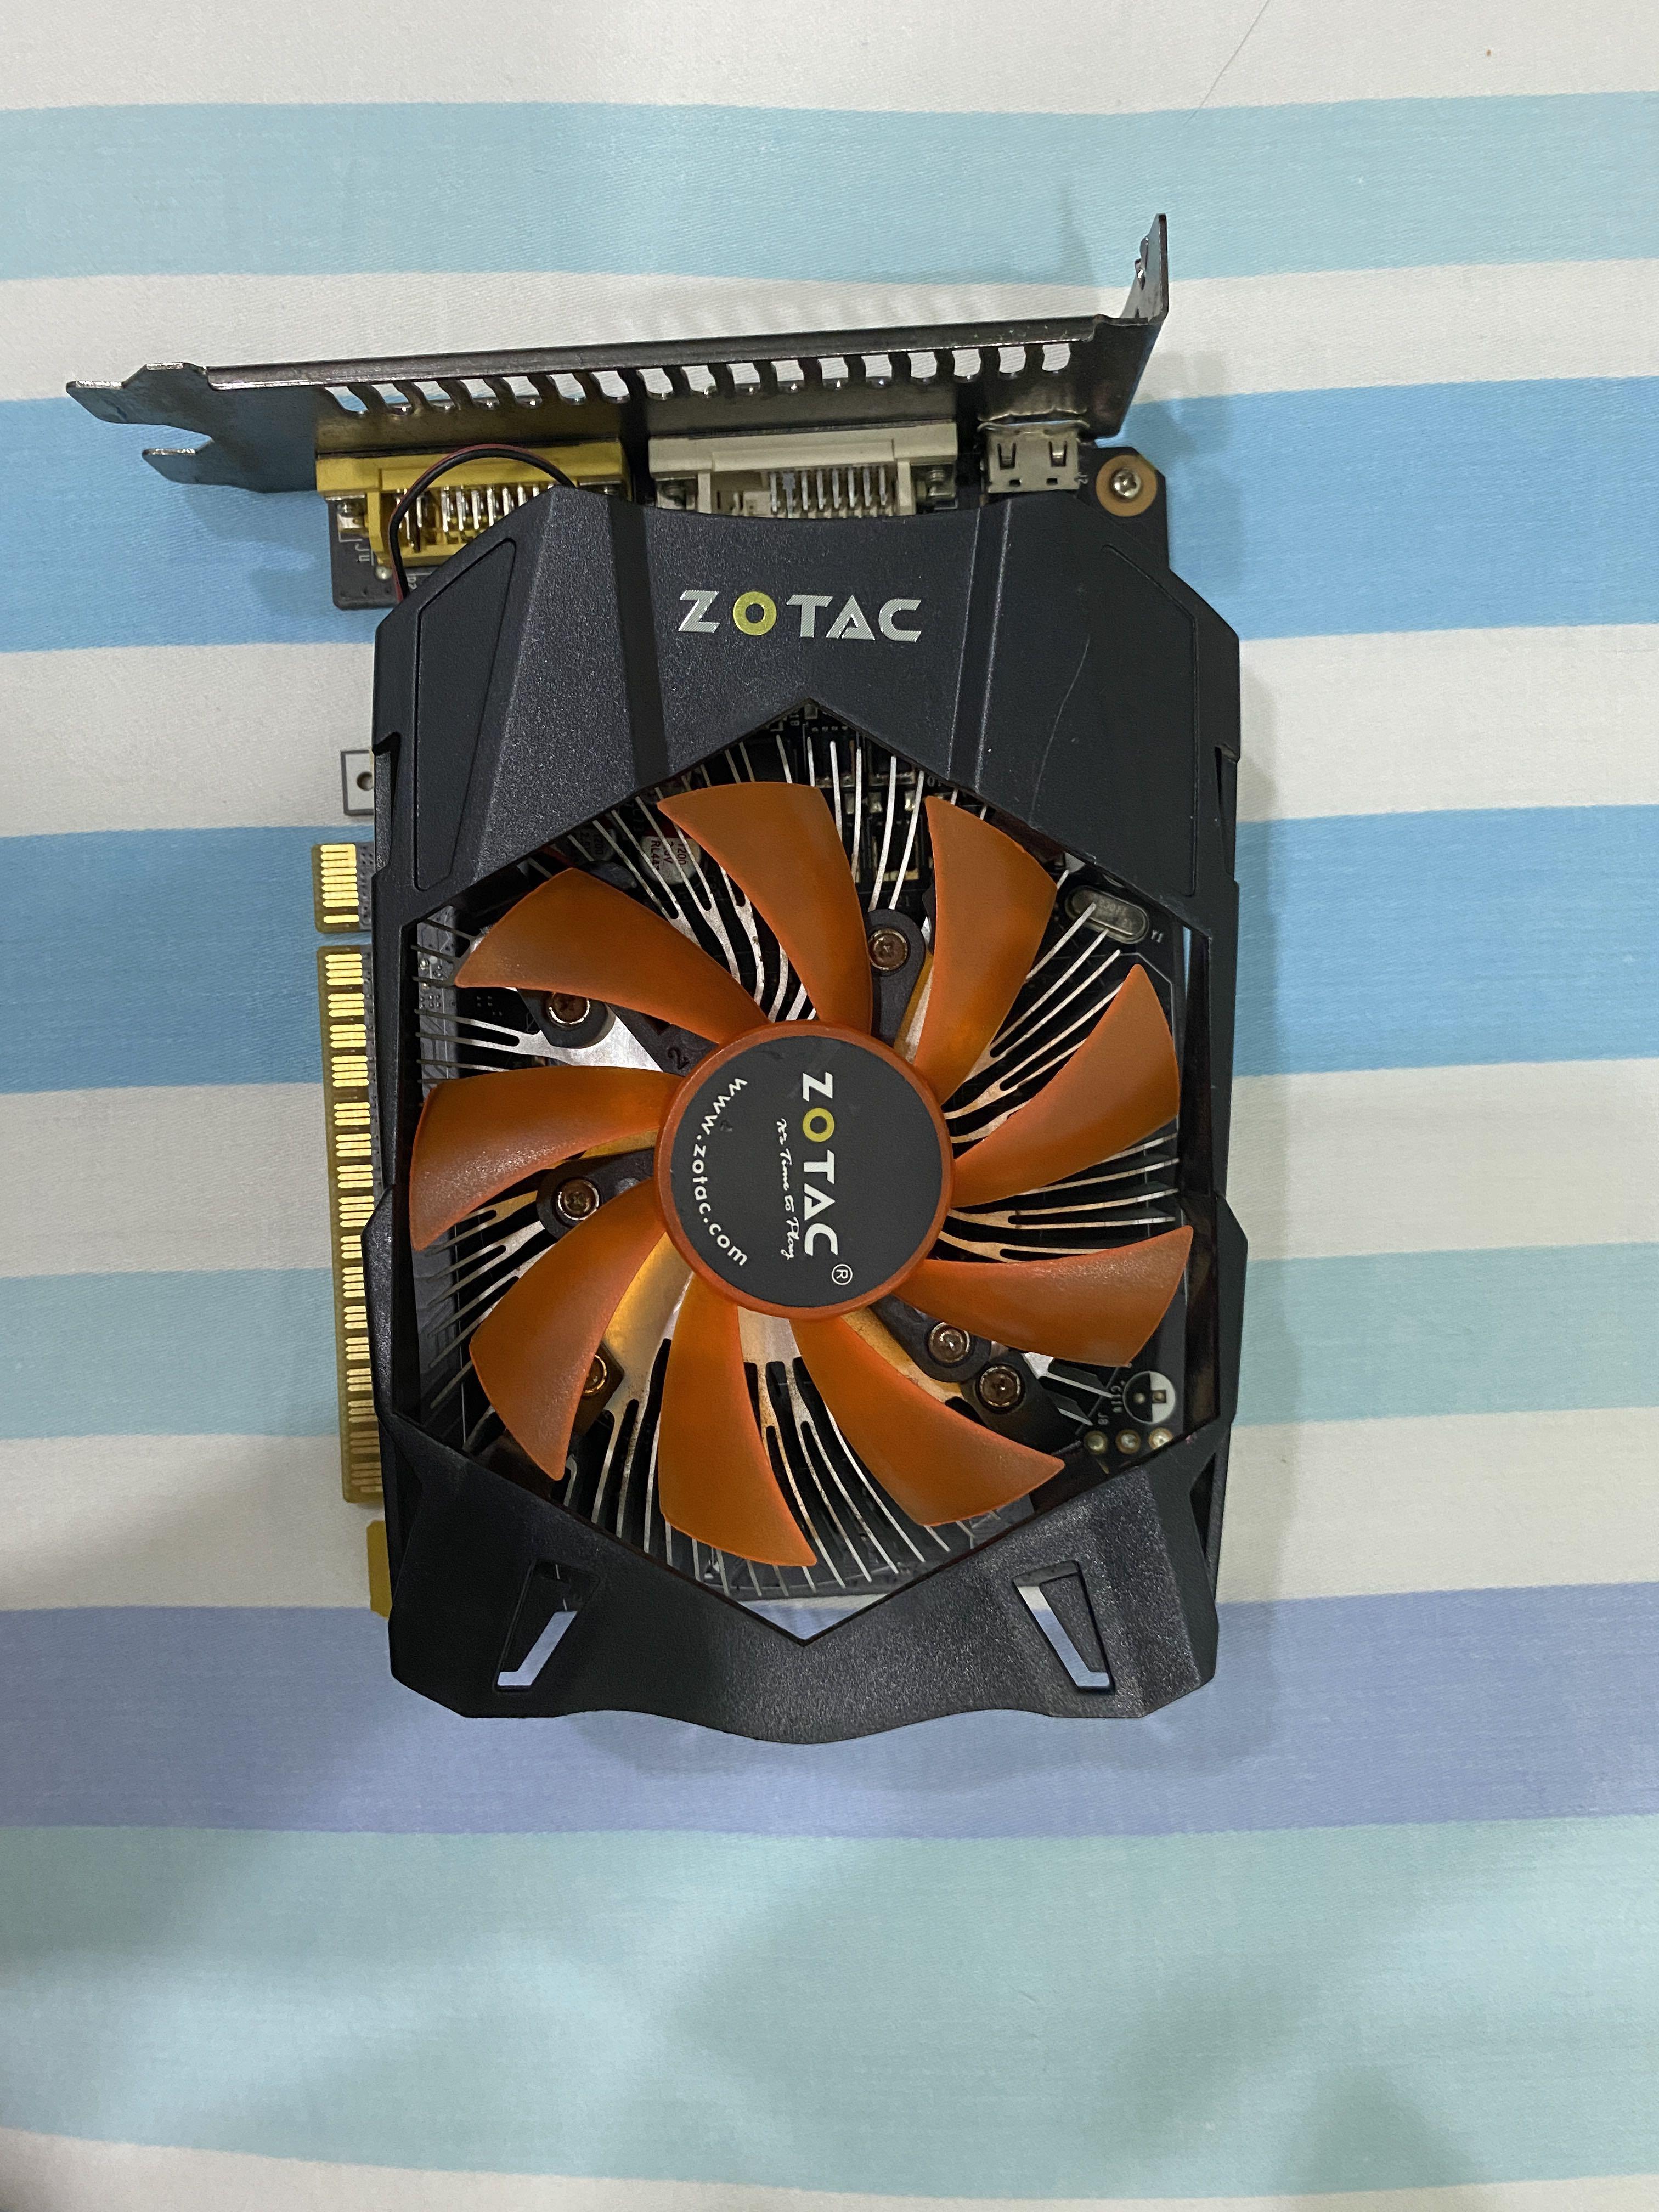 Zotac Nvidia Geforce Gtx 750 Ti 2gb Computers Tech Parts Accessories Computer Parts On Carousell